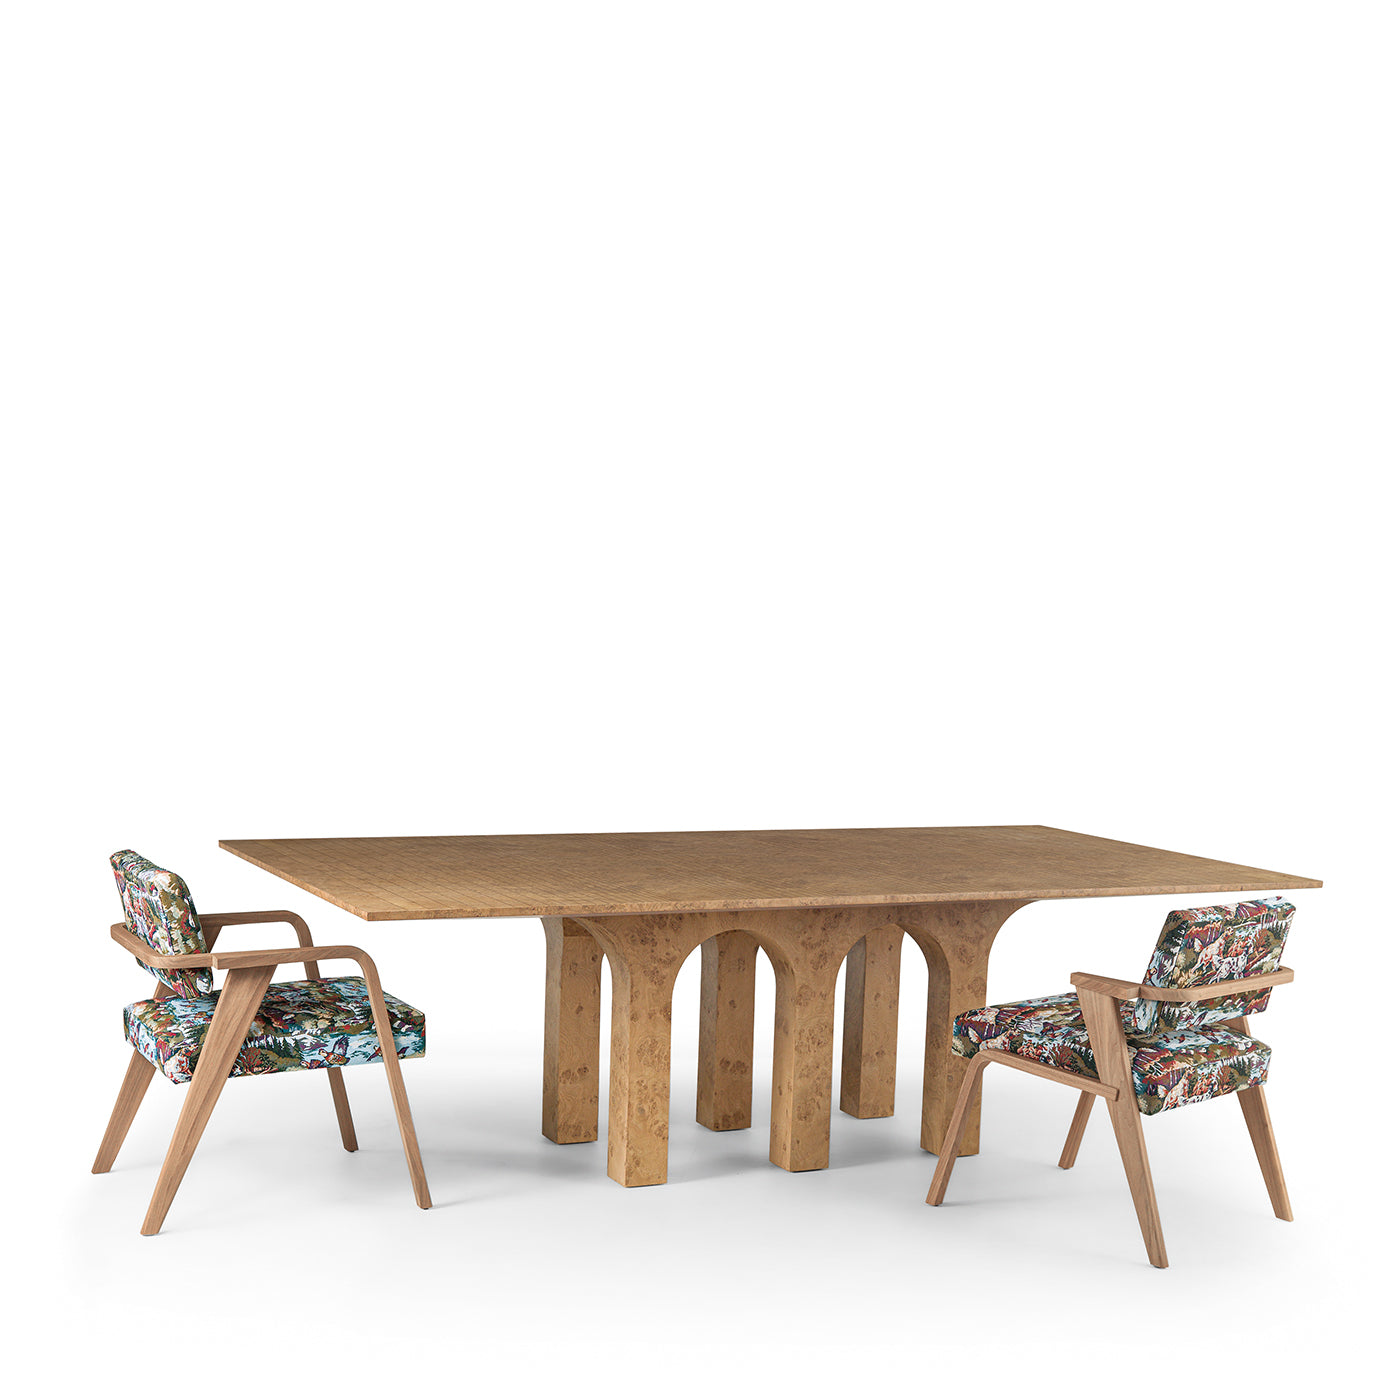 ARCHI Dining Table in burl by StorageMilano - Alternative view 3